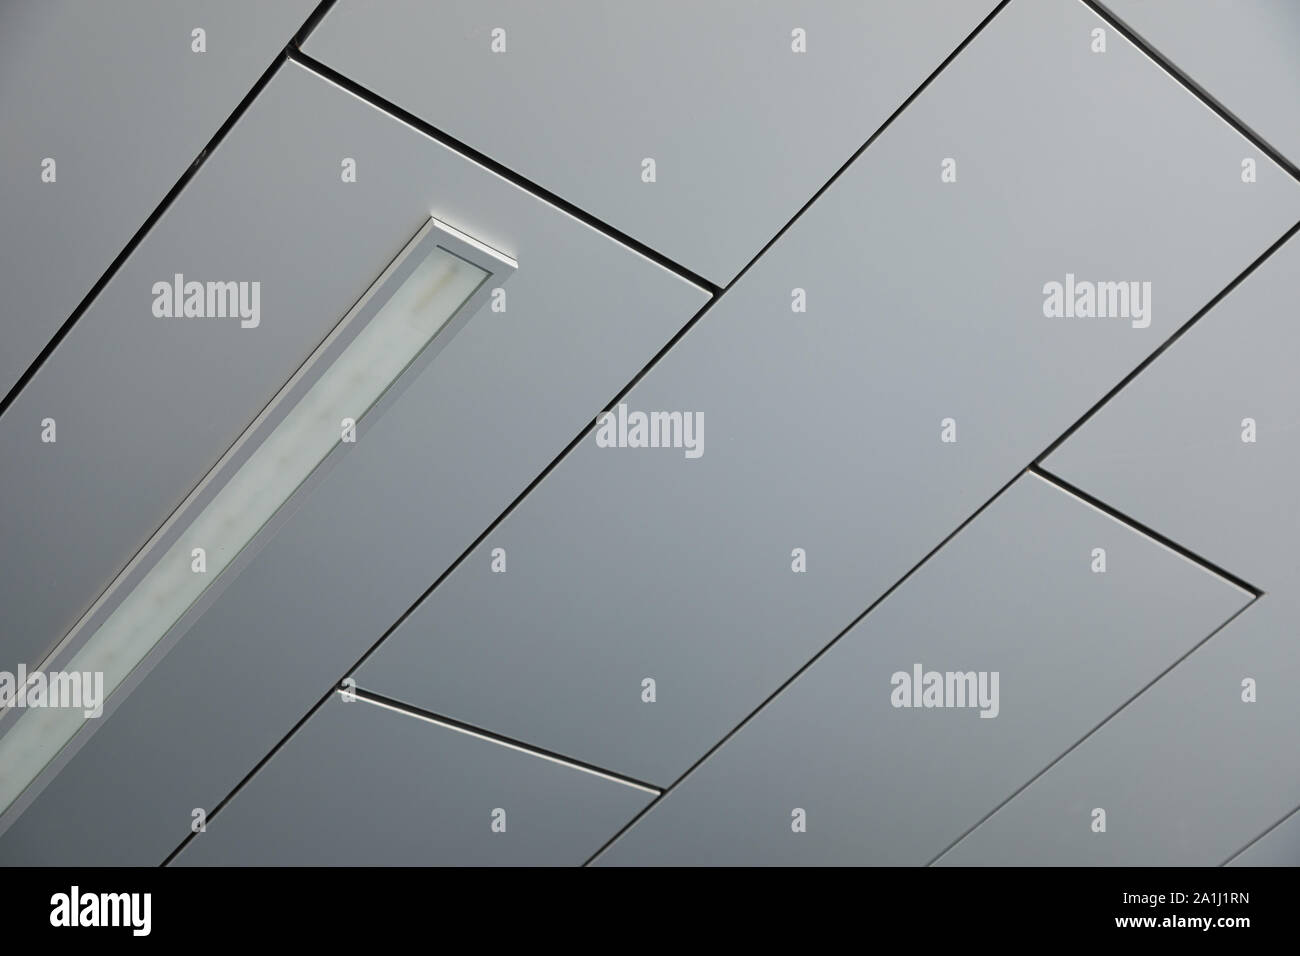 Ceiling Tiles Stock Photos Ceiling Tiles Stock Images Page 3